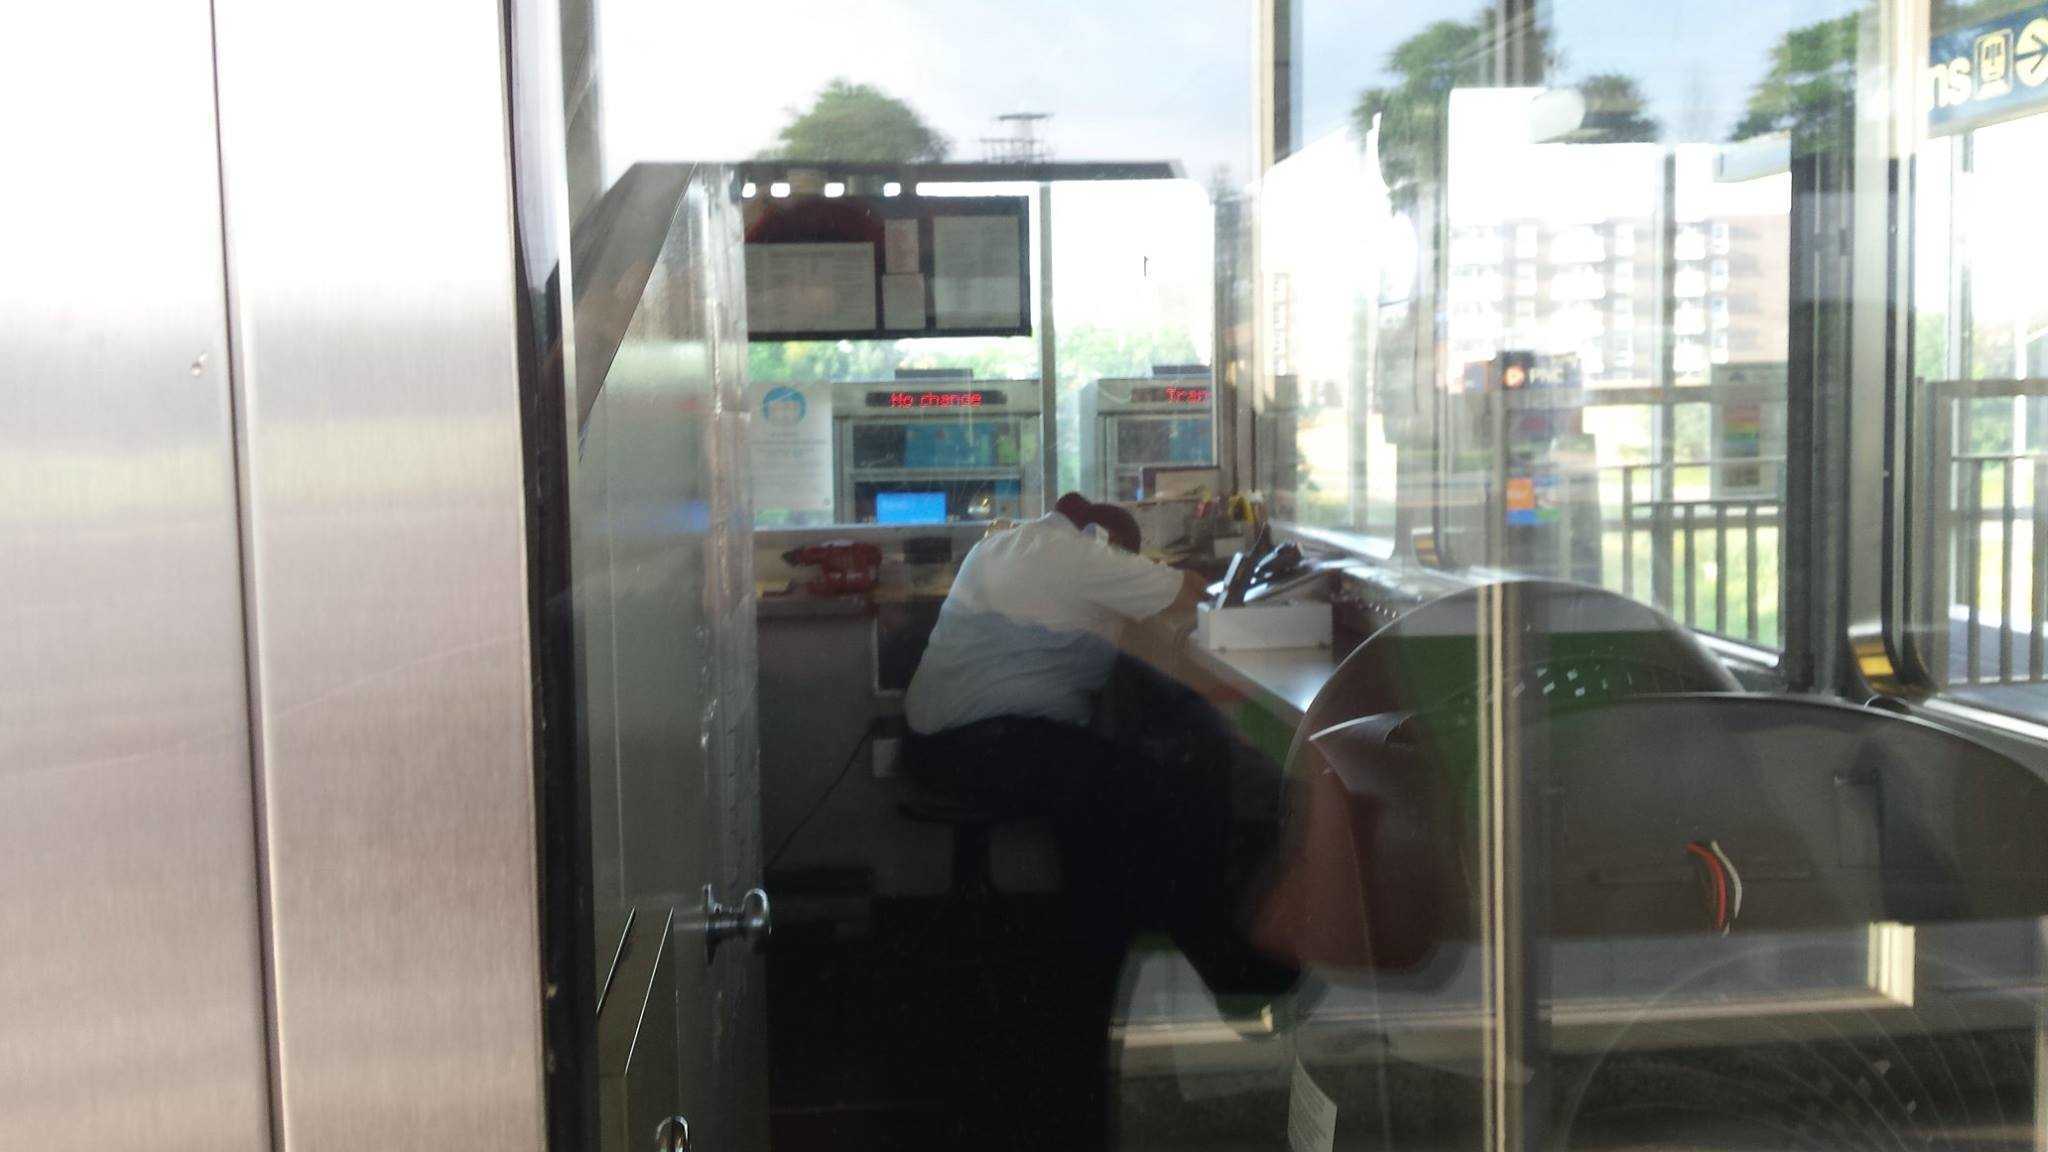 Snoozin on the job.  I think there will be an opening at CTA soon…